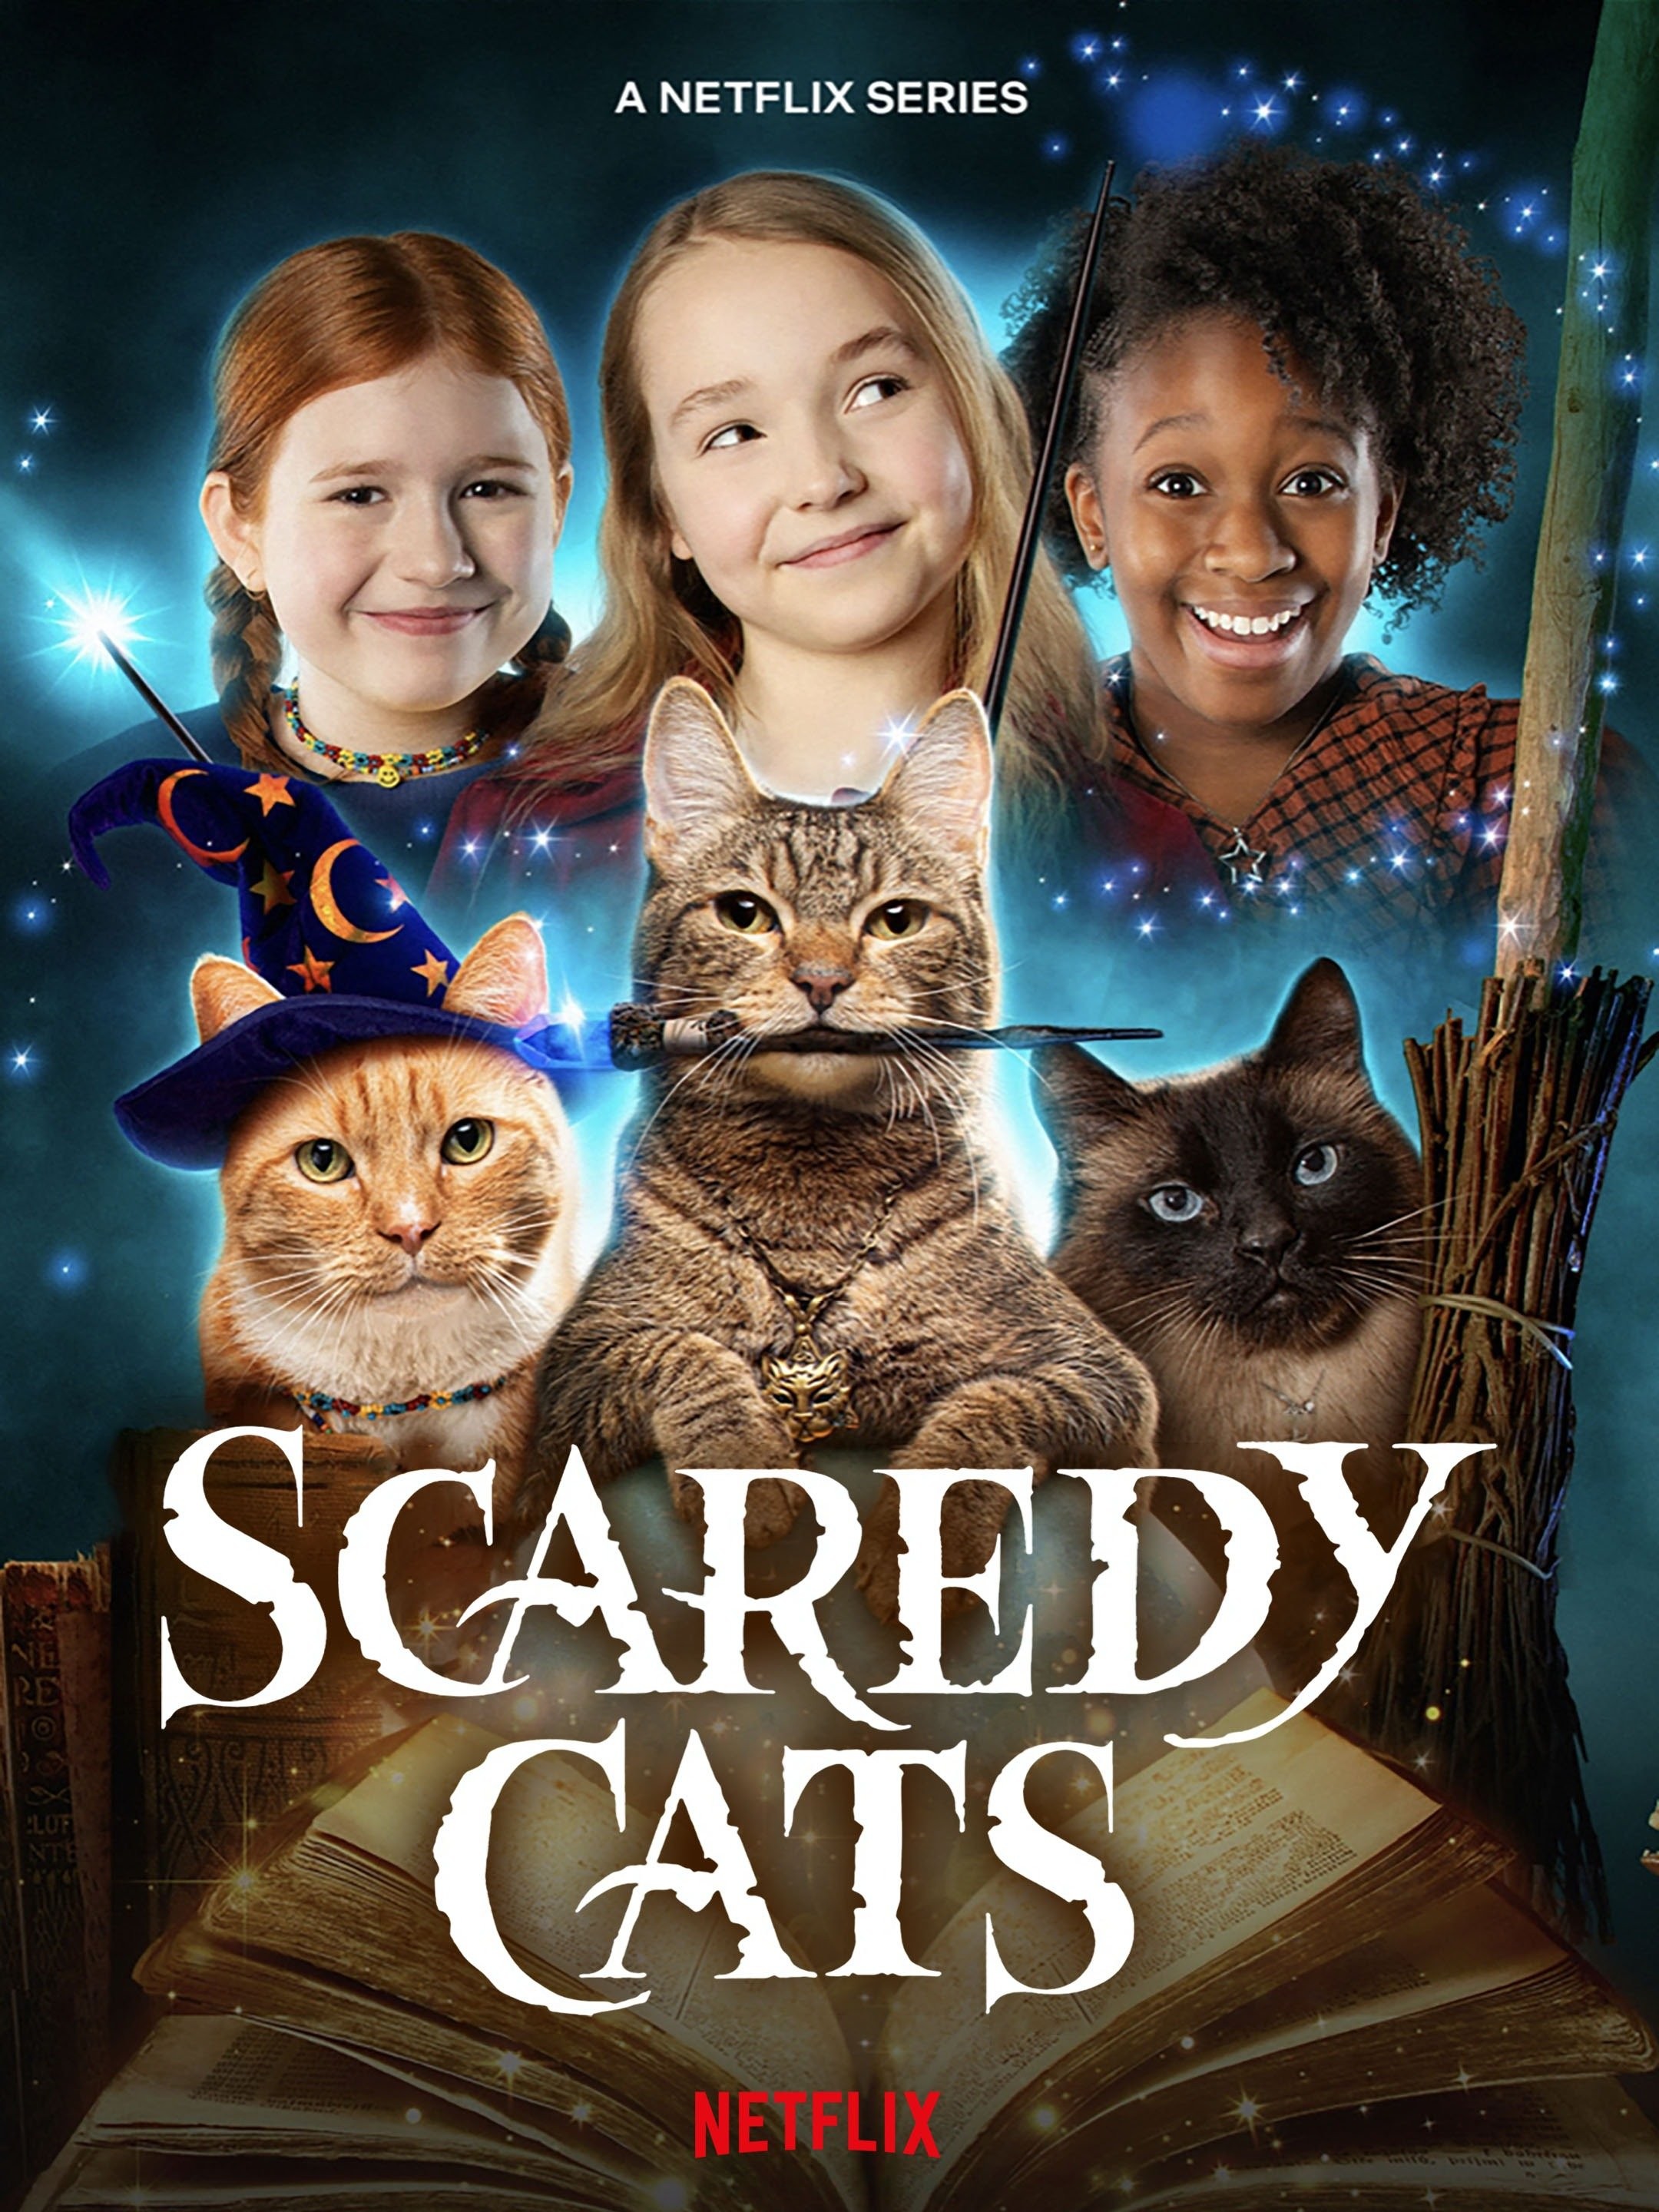 This Spooky Season, Help Us Show These “Scaredy Cats” Some Love!